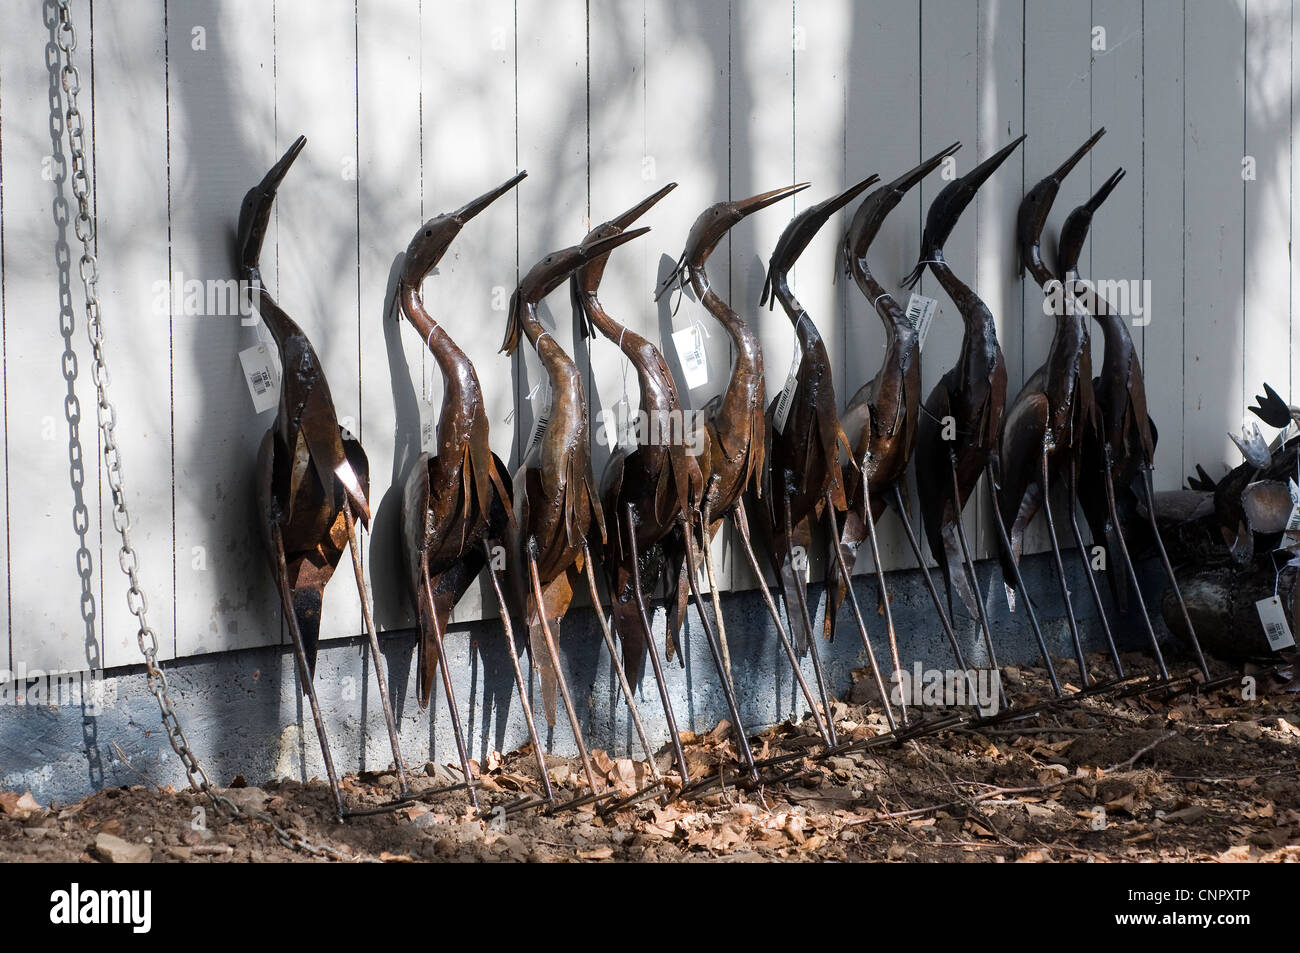 cranes with price tags leaning against wall,beak, bird, birdwatching, cap, conservation, crane, digging, retail sector Stock Photo